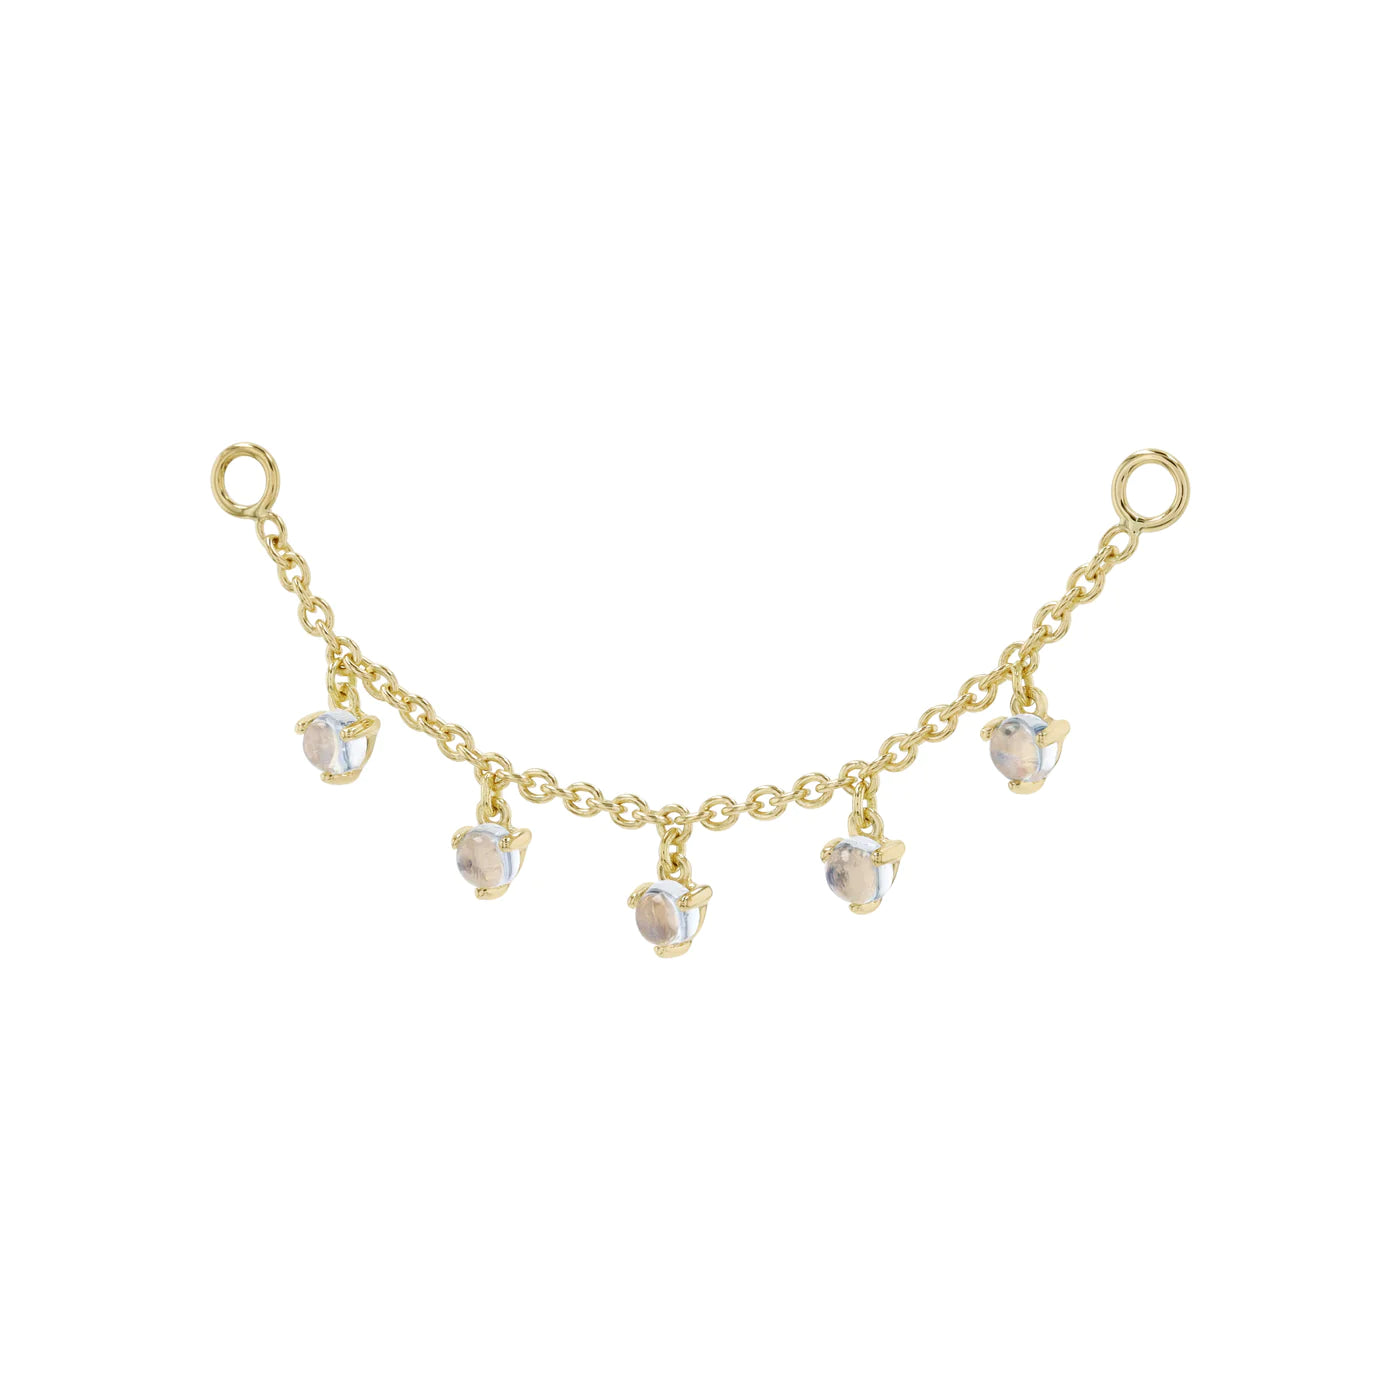 MODERN MOOD - CHAIN WITH DRIPPING CABOCHON GEMSTONE (5 GEM) - 14KT SOLID GOLD - CHAIN